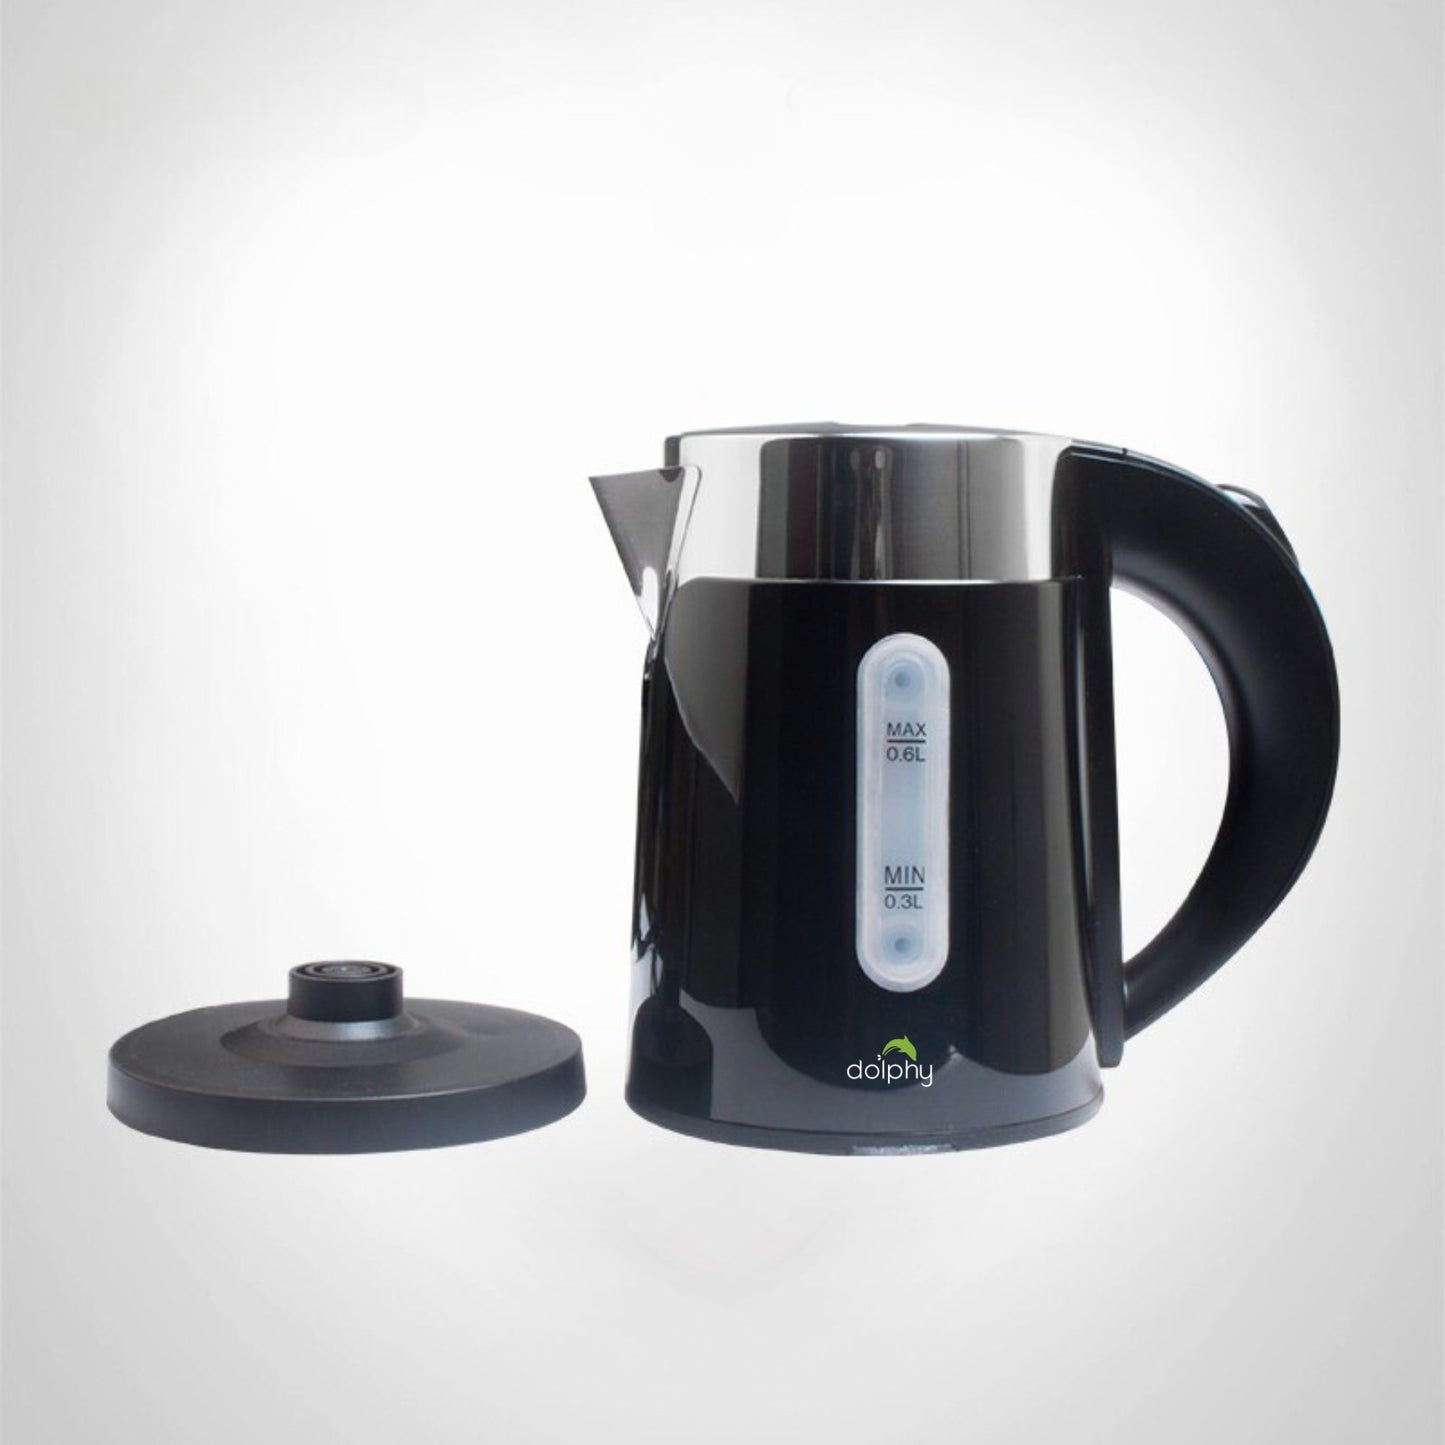 0.6L Stainless Steel Electric Kettle Black